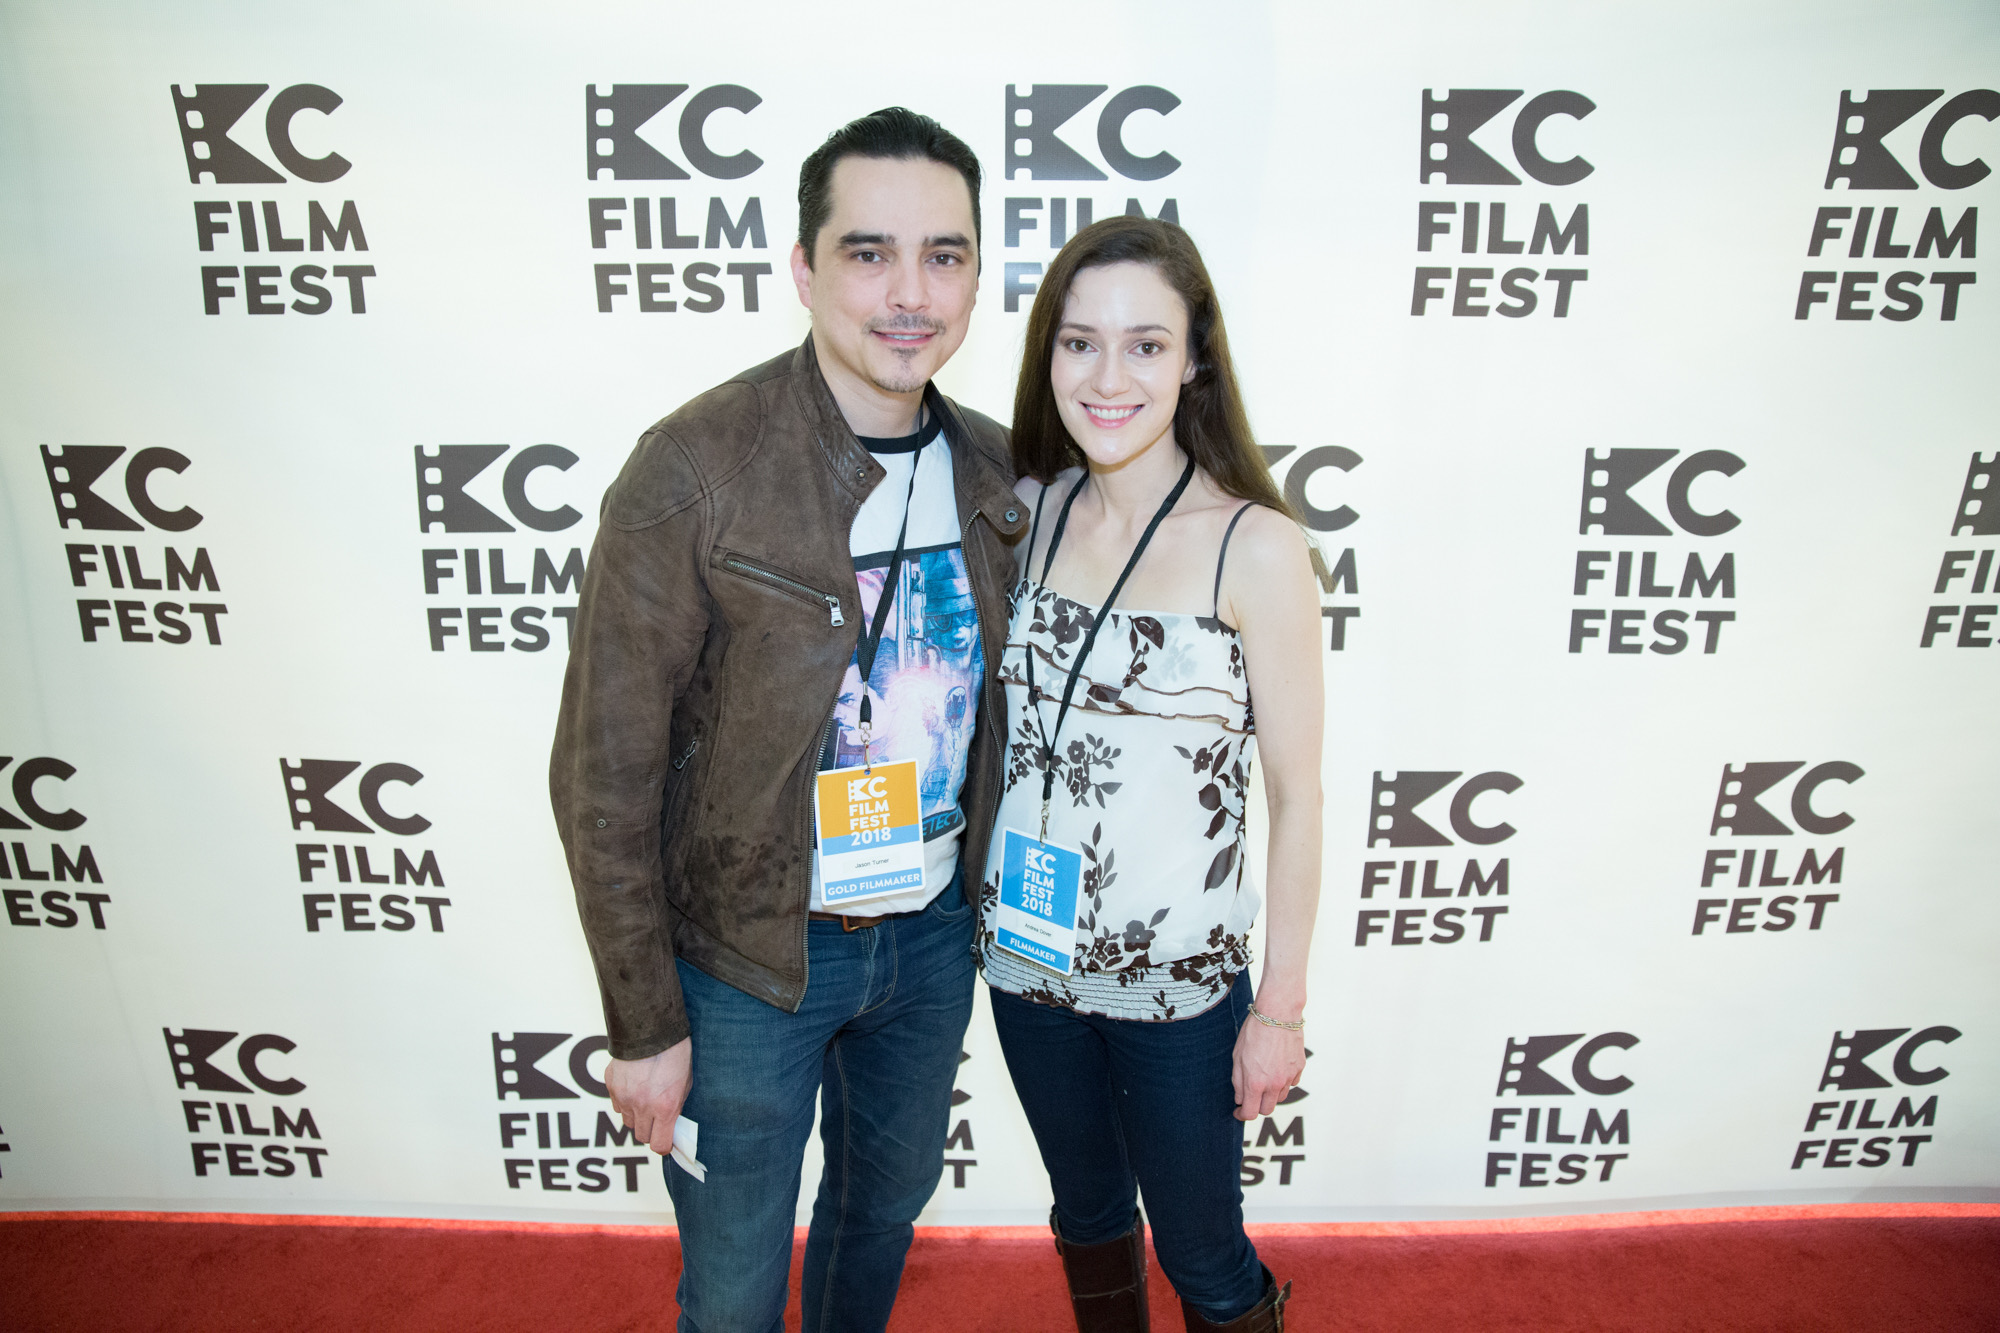 A man and a woman at the KC Film Fest event